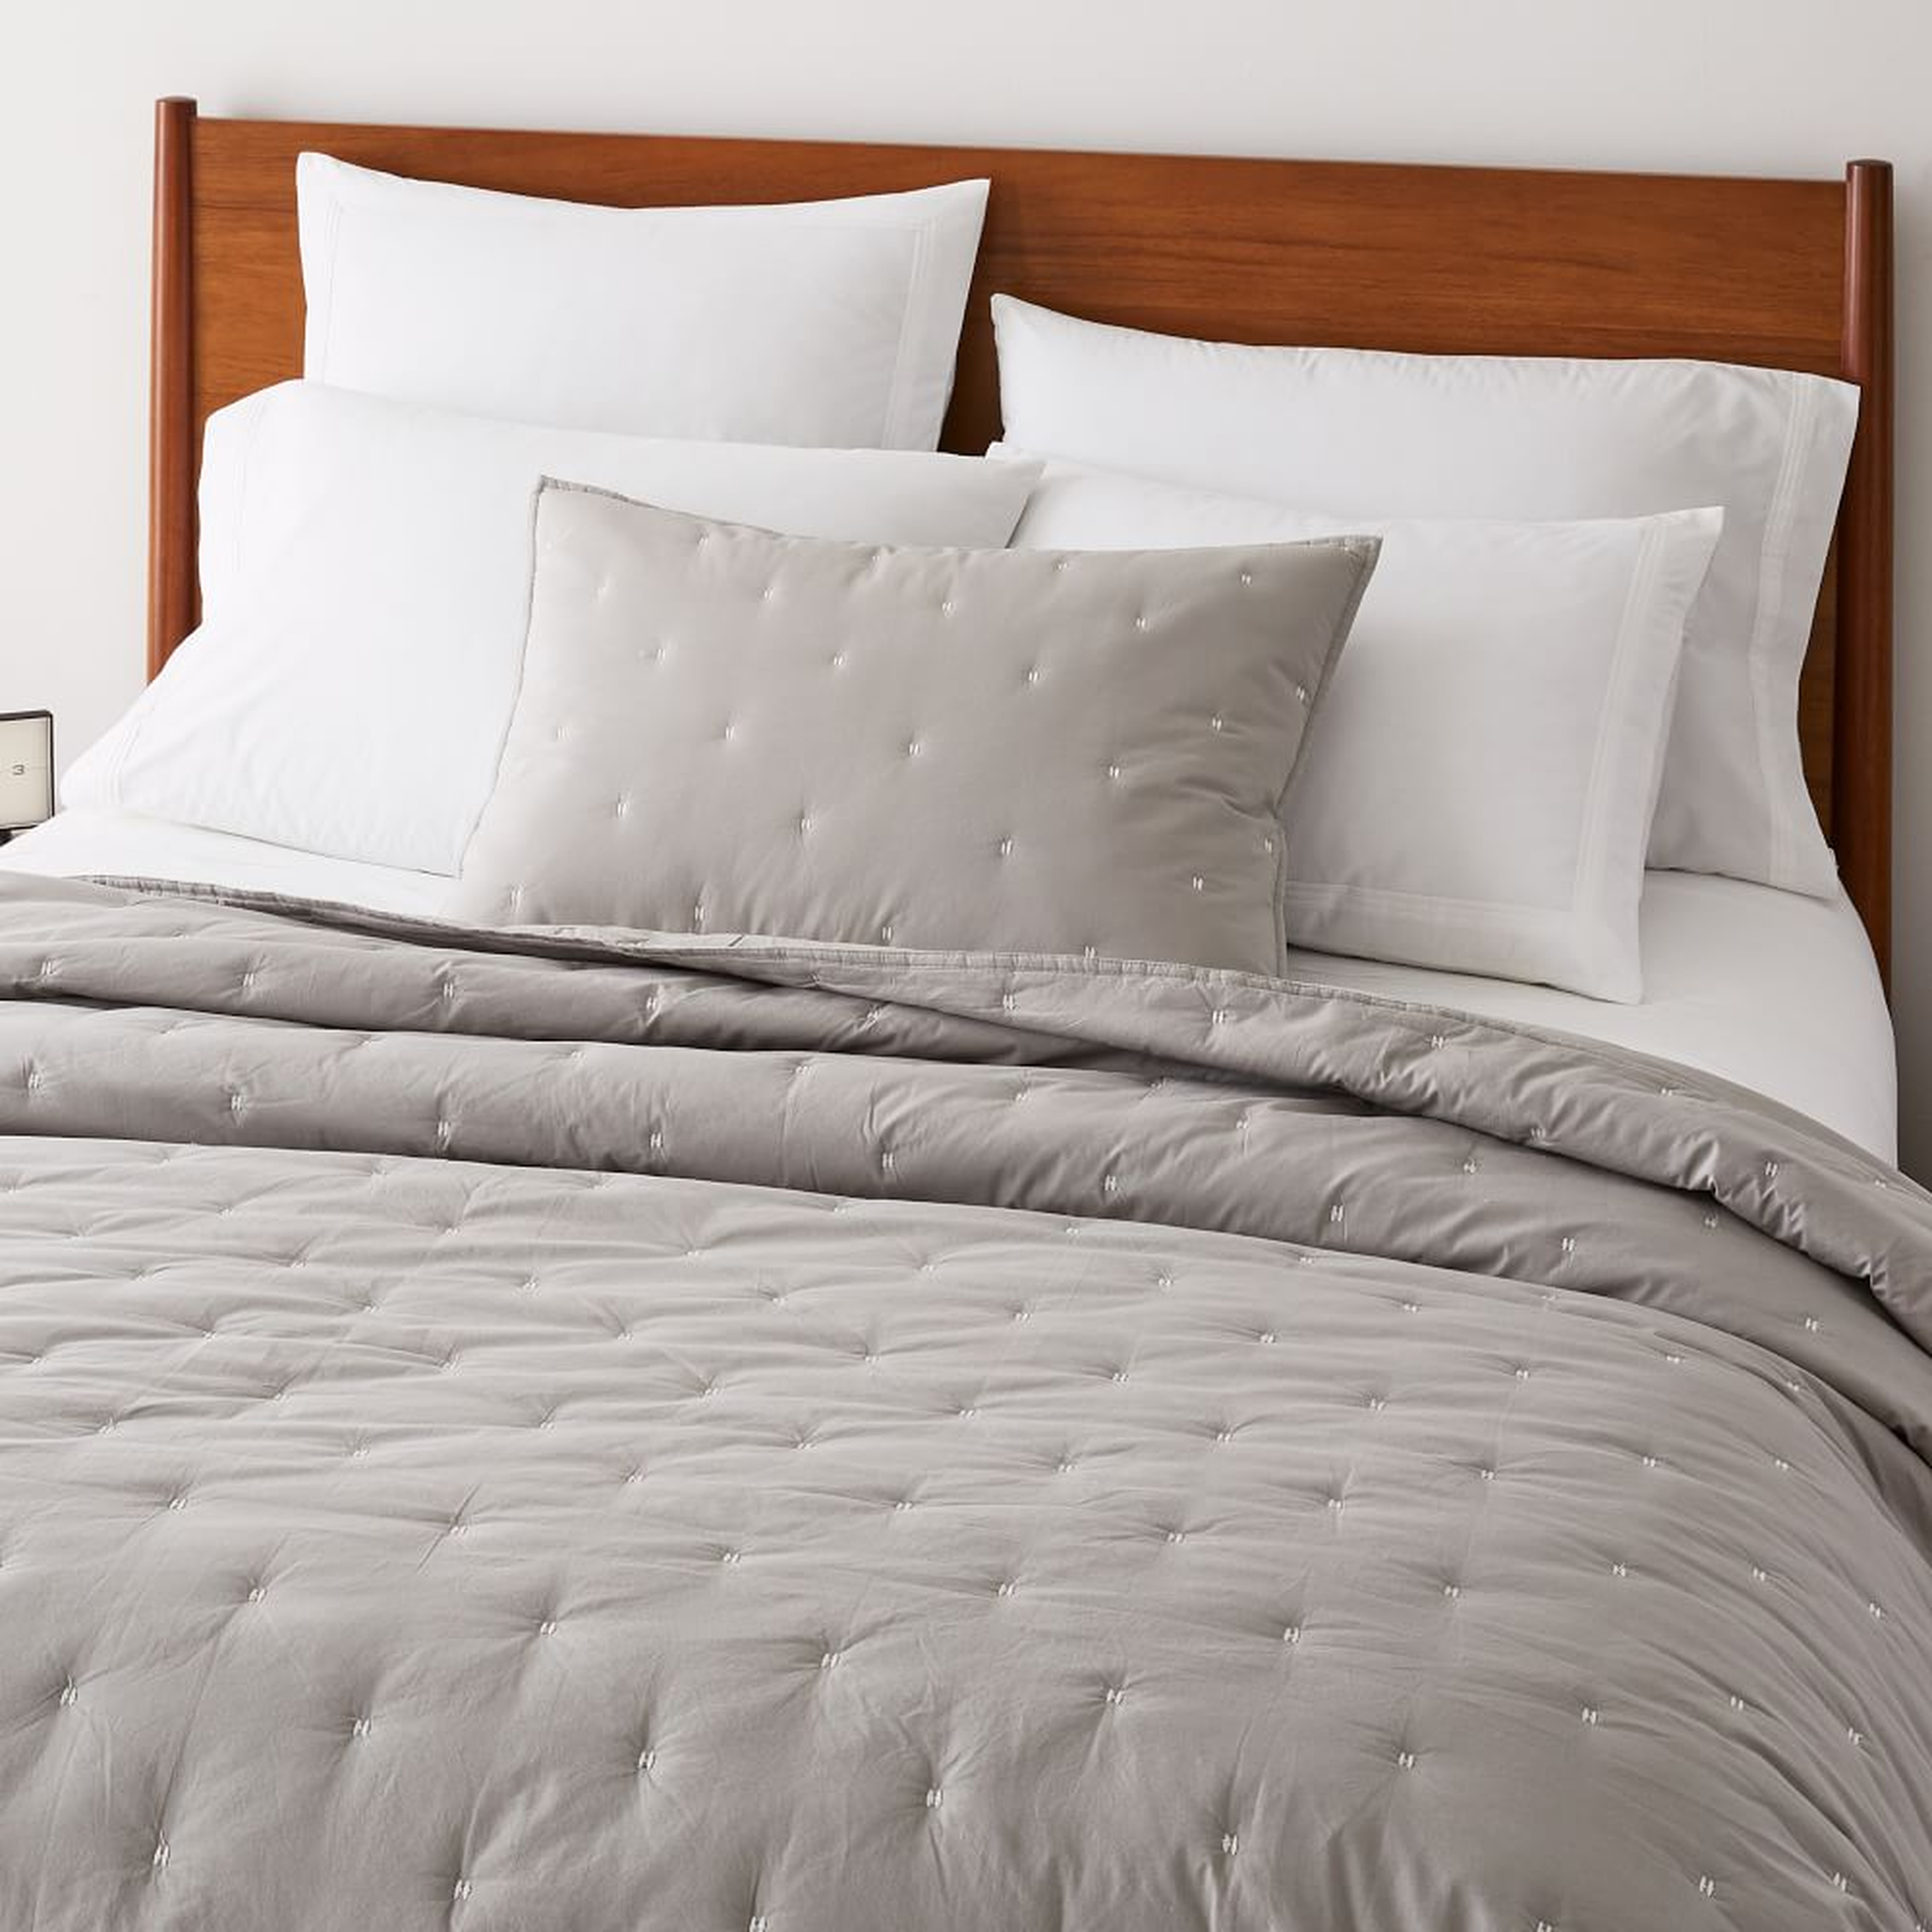 Organic Washed Cotton Quilt, King/Cal. King Set, Pearl Gray - West Elm